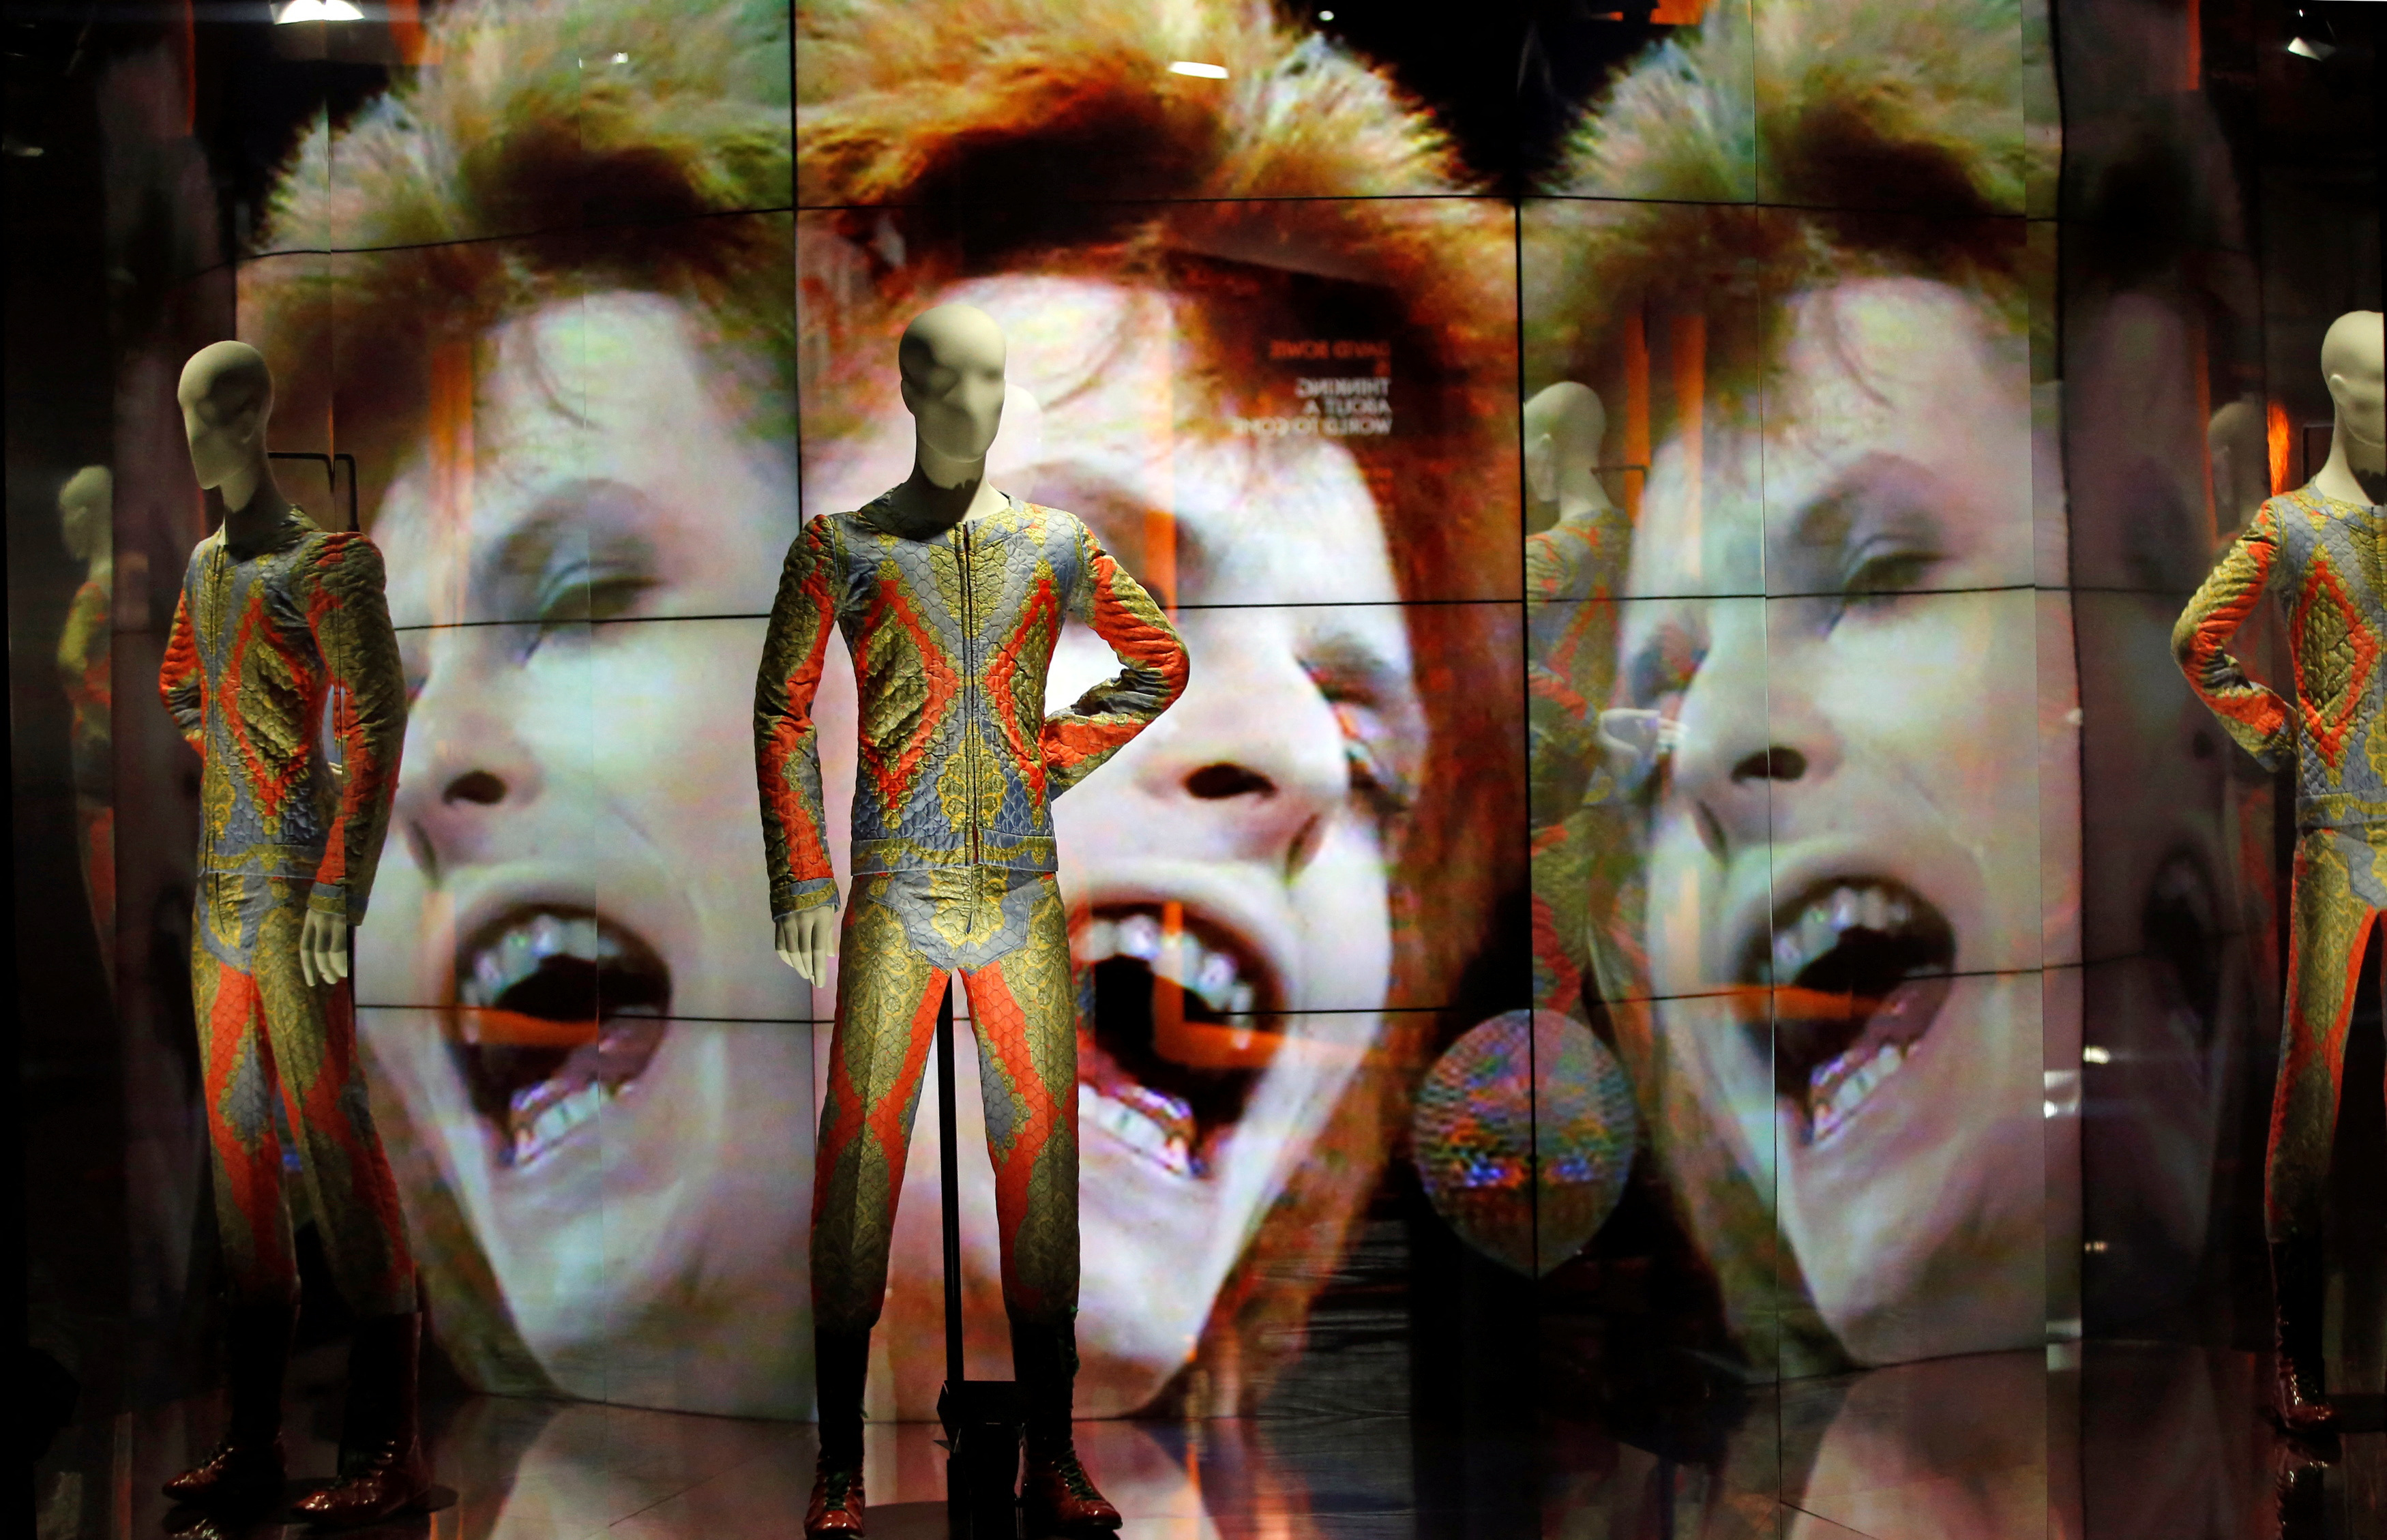 Two suits designed by Freddie Burretti for the Ziggy Stardust tour are displayed during the exhibition "David Bowie Is" at the Paris Philharmonic Hall "Philharmonie de Paris\